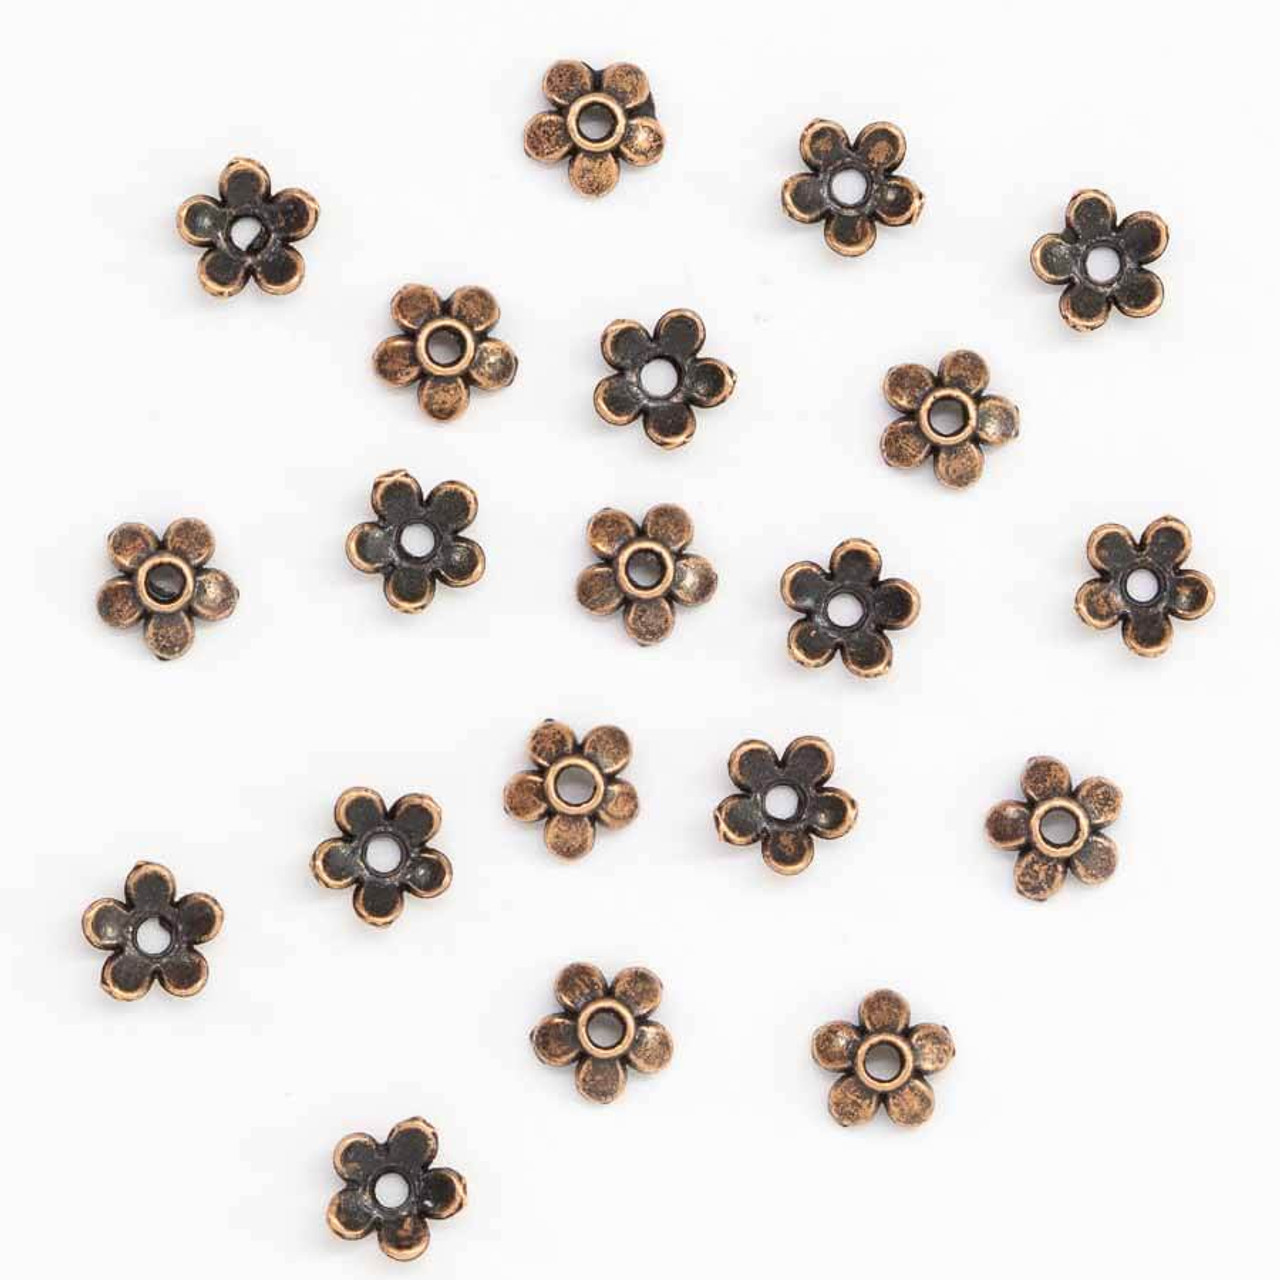 50 pcs of Antique Silver Textured Coil Flower Bead Caps 8mm A5579